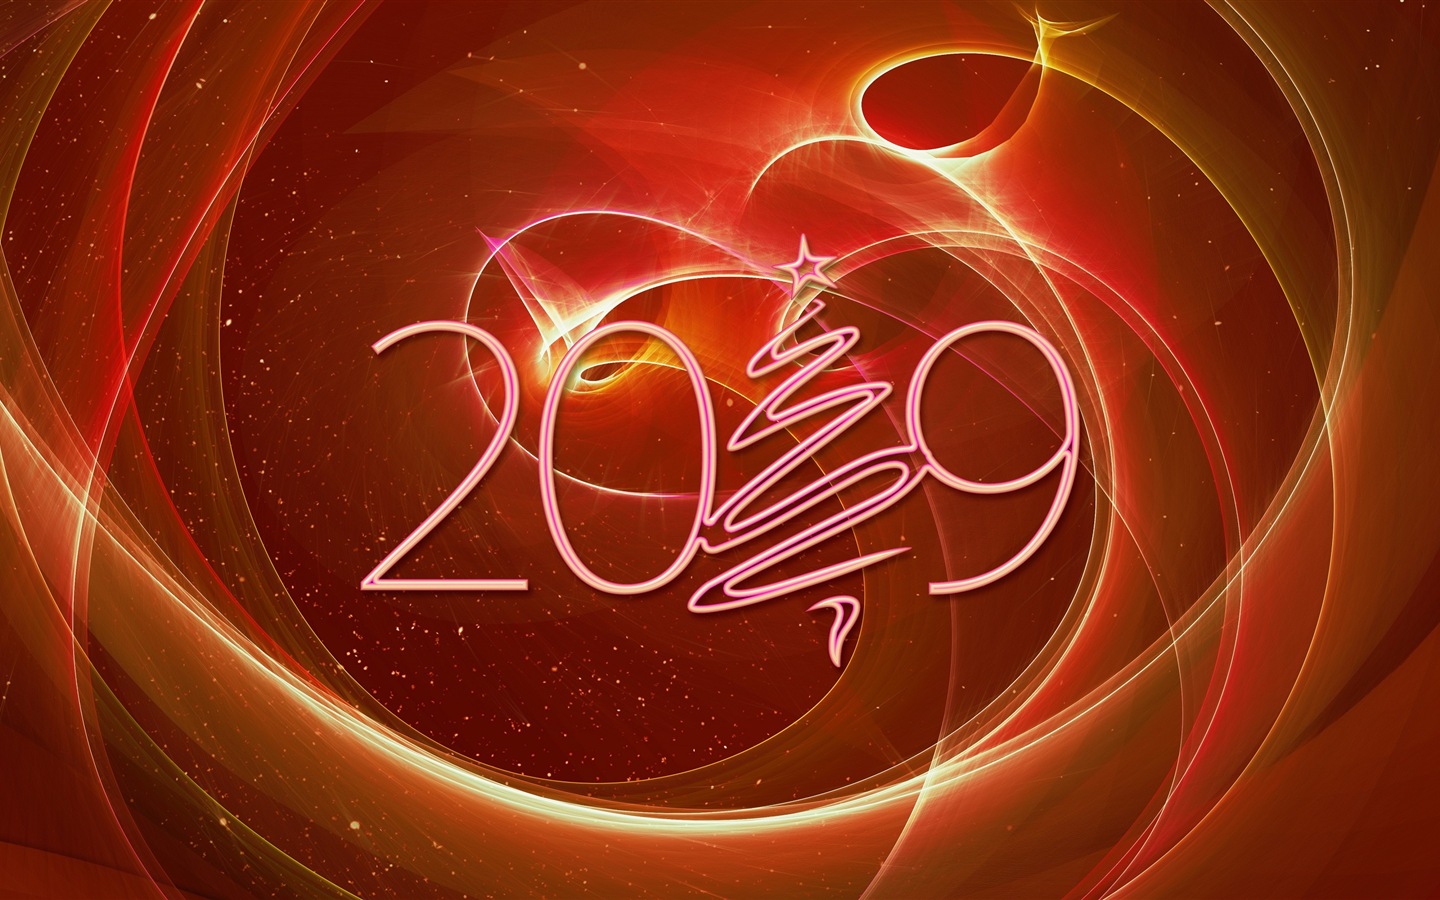 Happy New Year 2019 HD wallpapers #4 - 1440x900